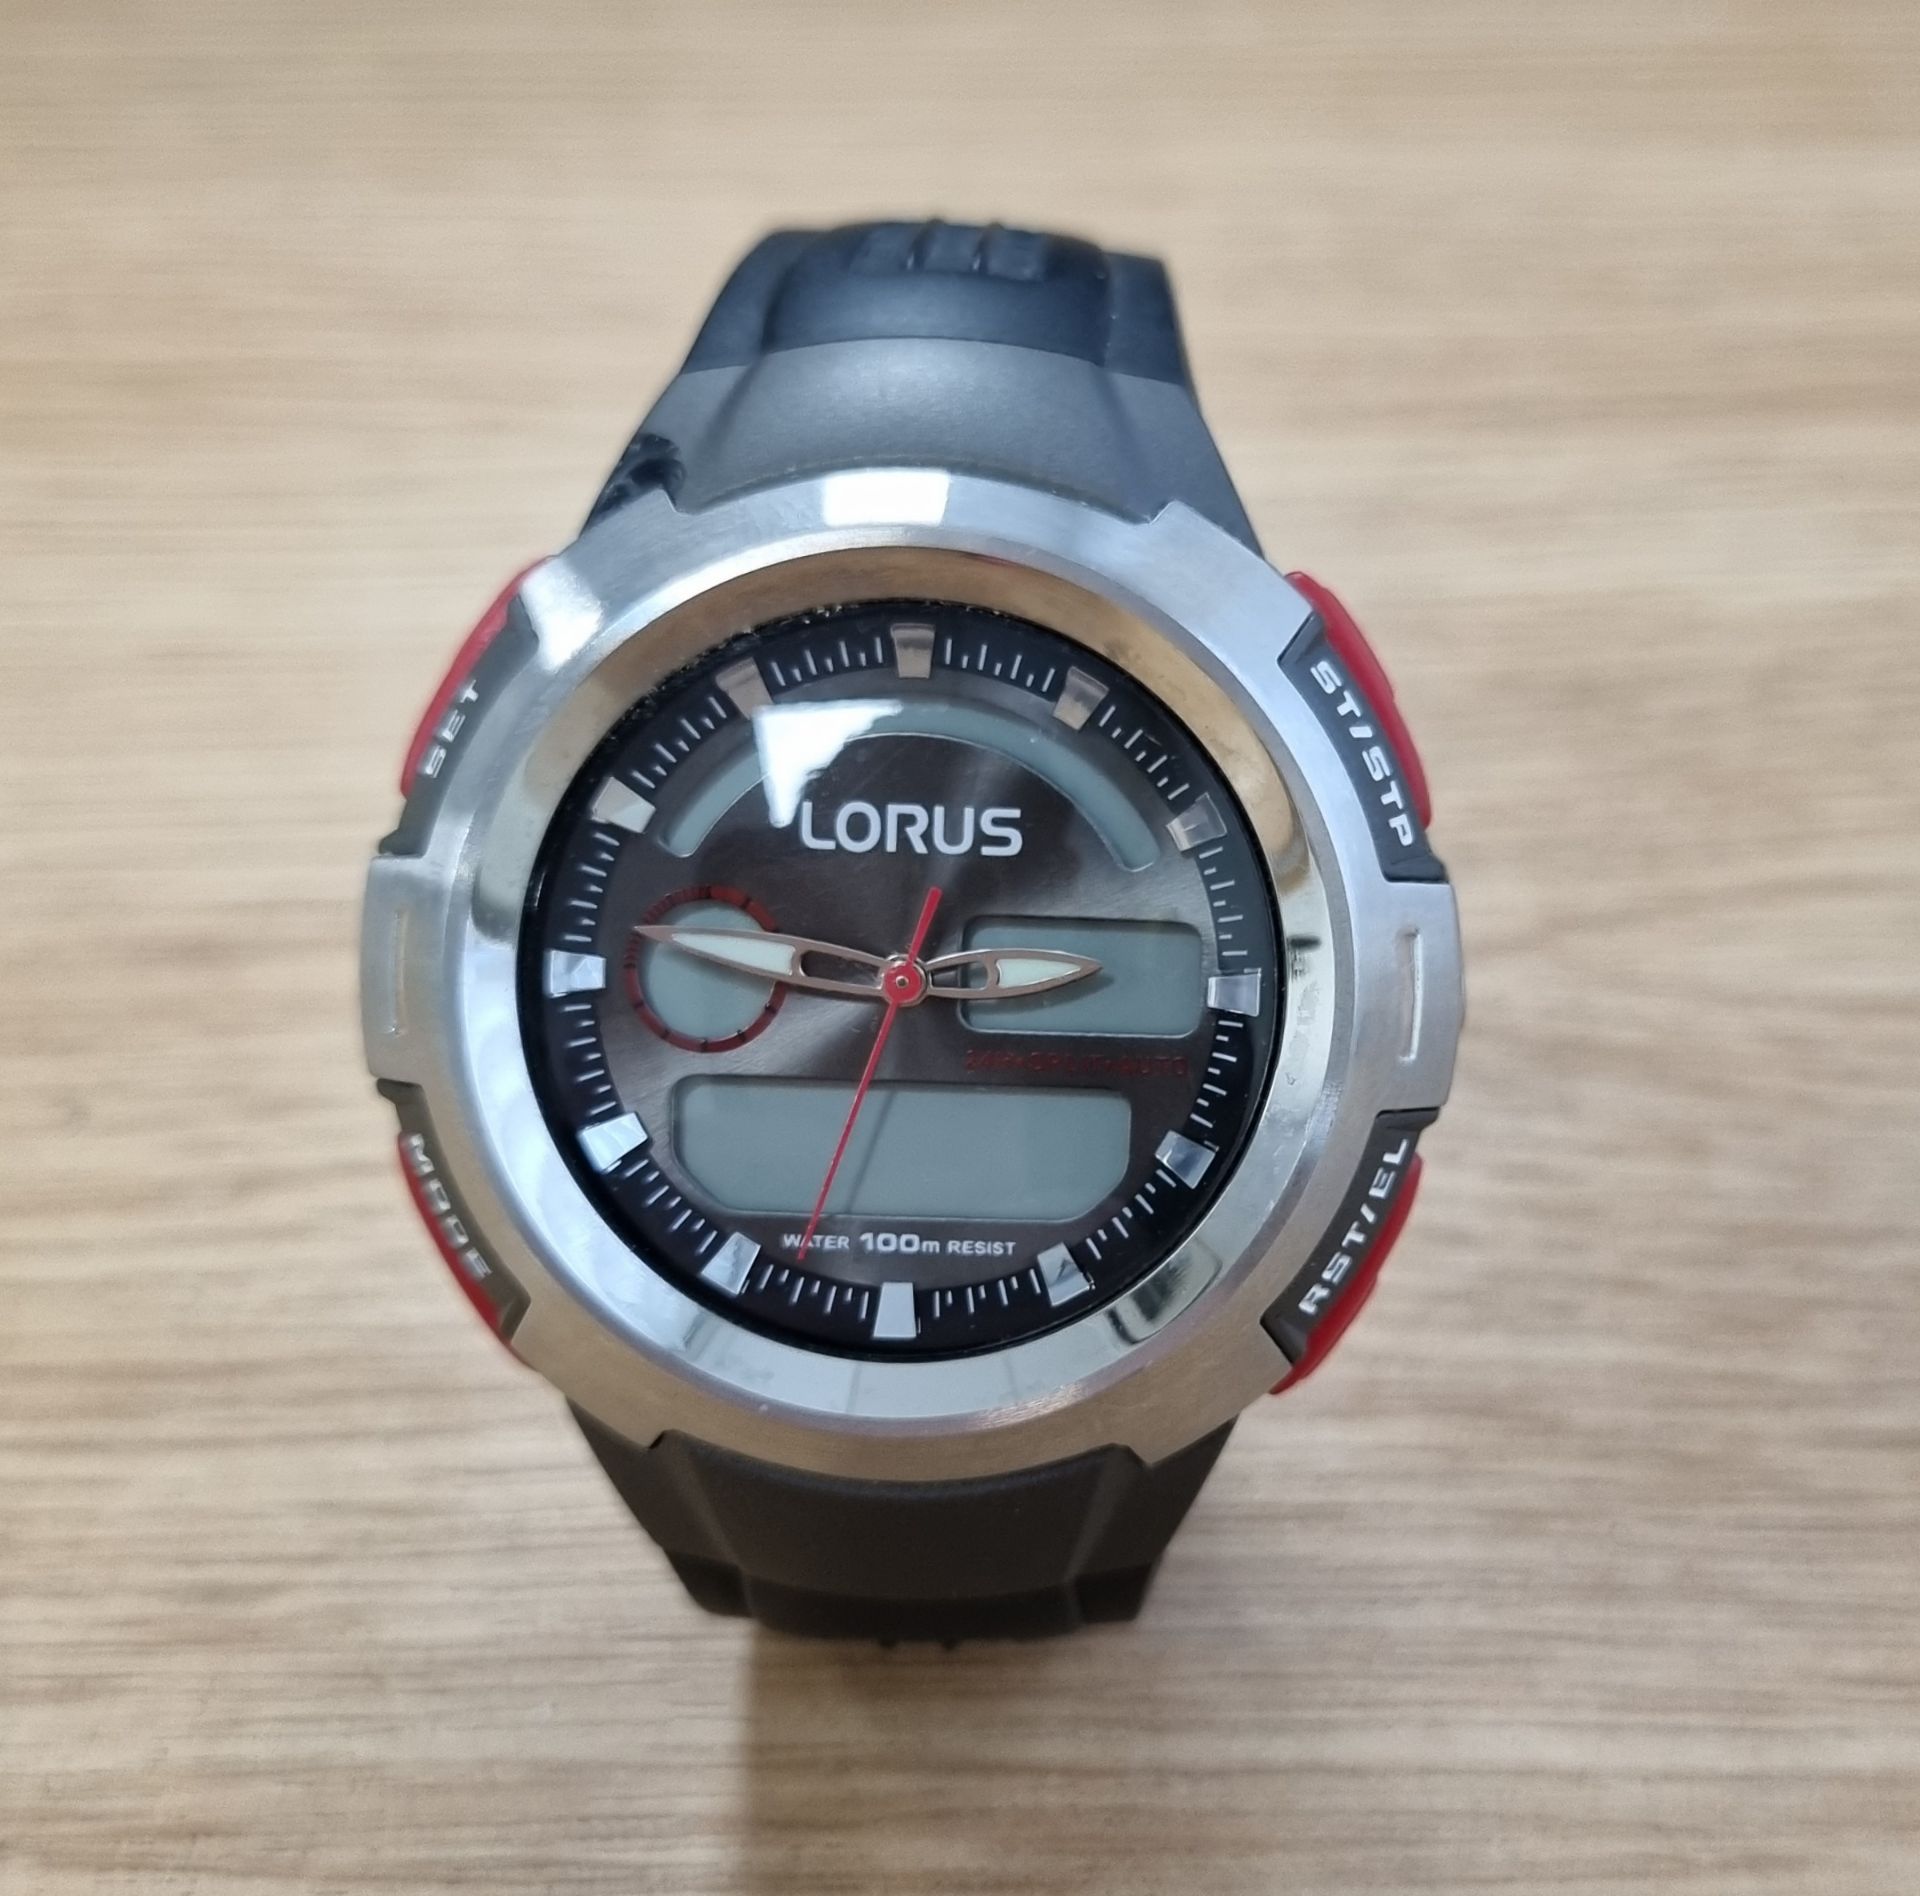 Lorus Z012-X001 mens dual display chronograph watch with resin strap